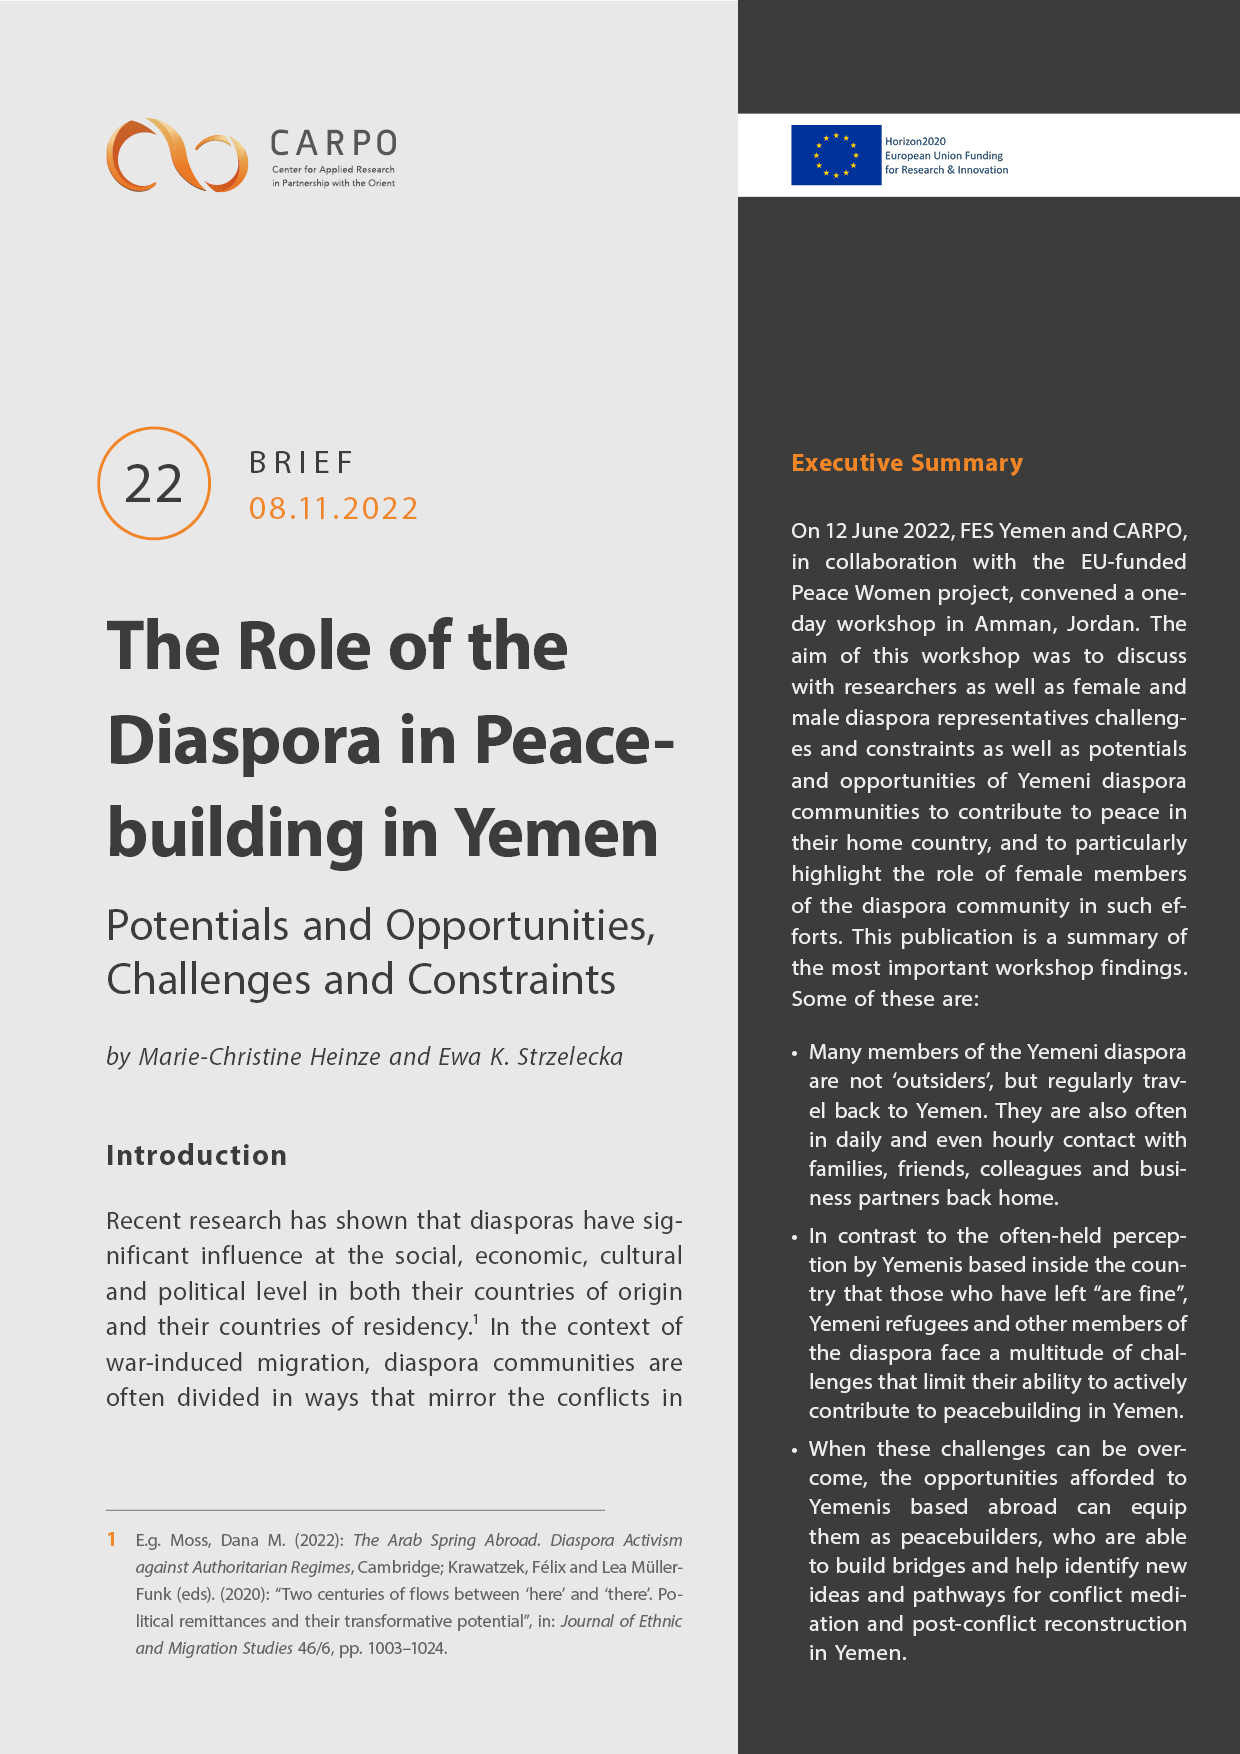 The Role of the Diaspora in Peacebuilding in Yemen. Potentials and Opportunities, Challenges and Constraints